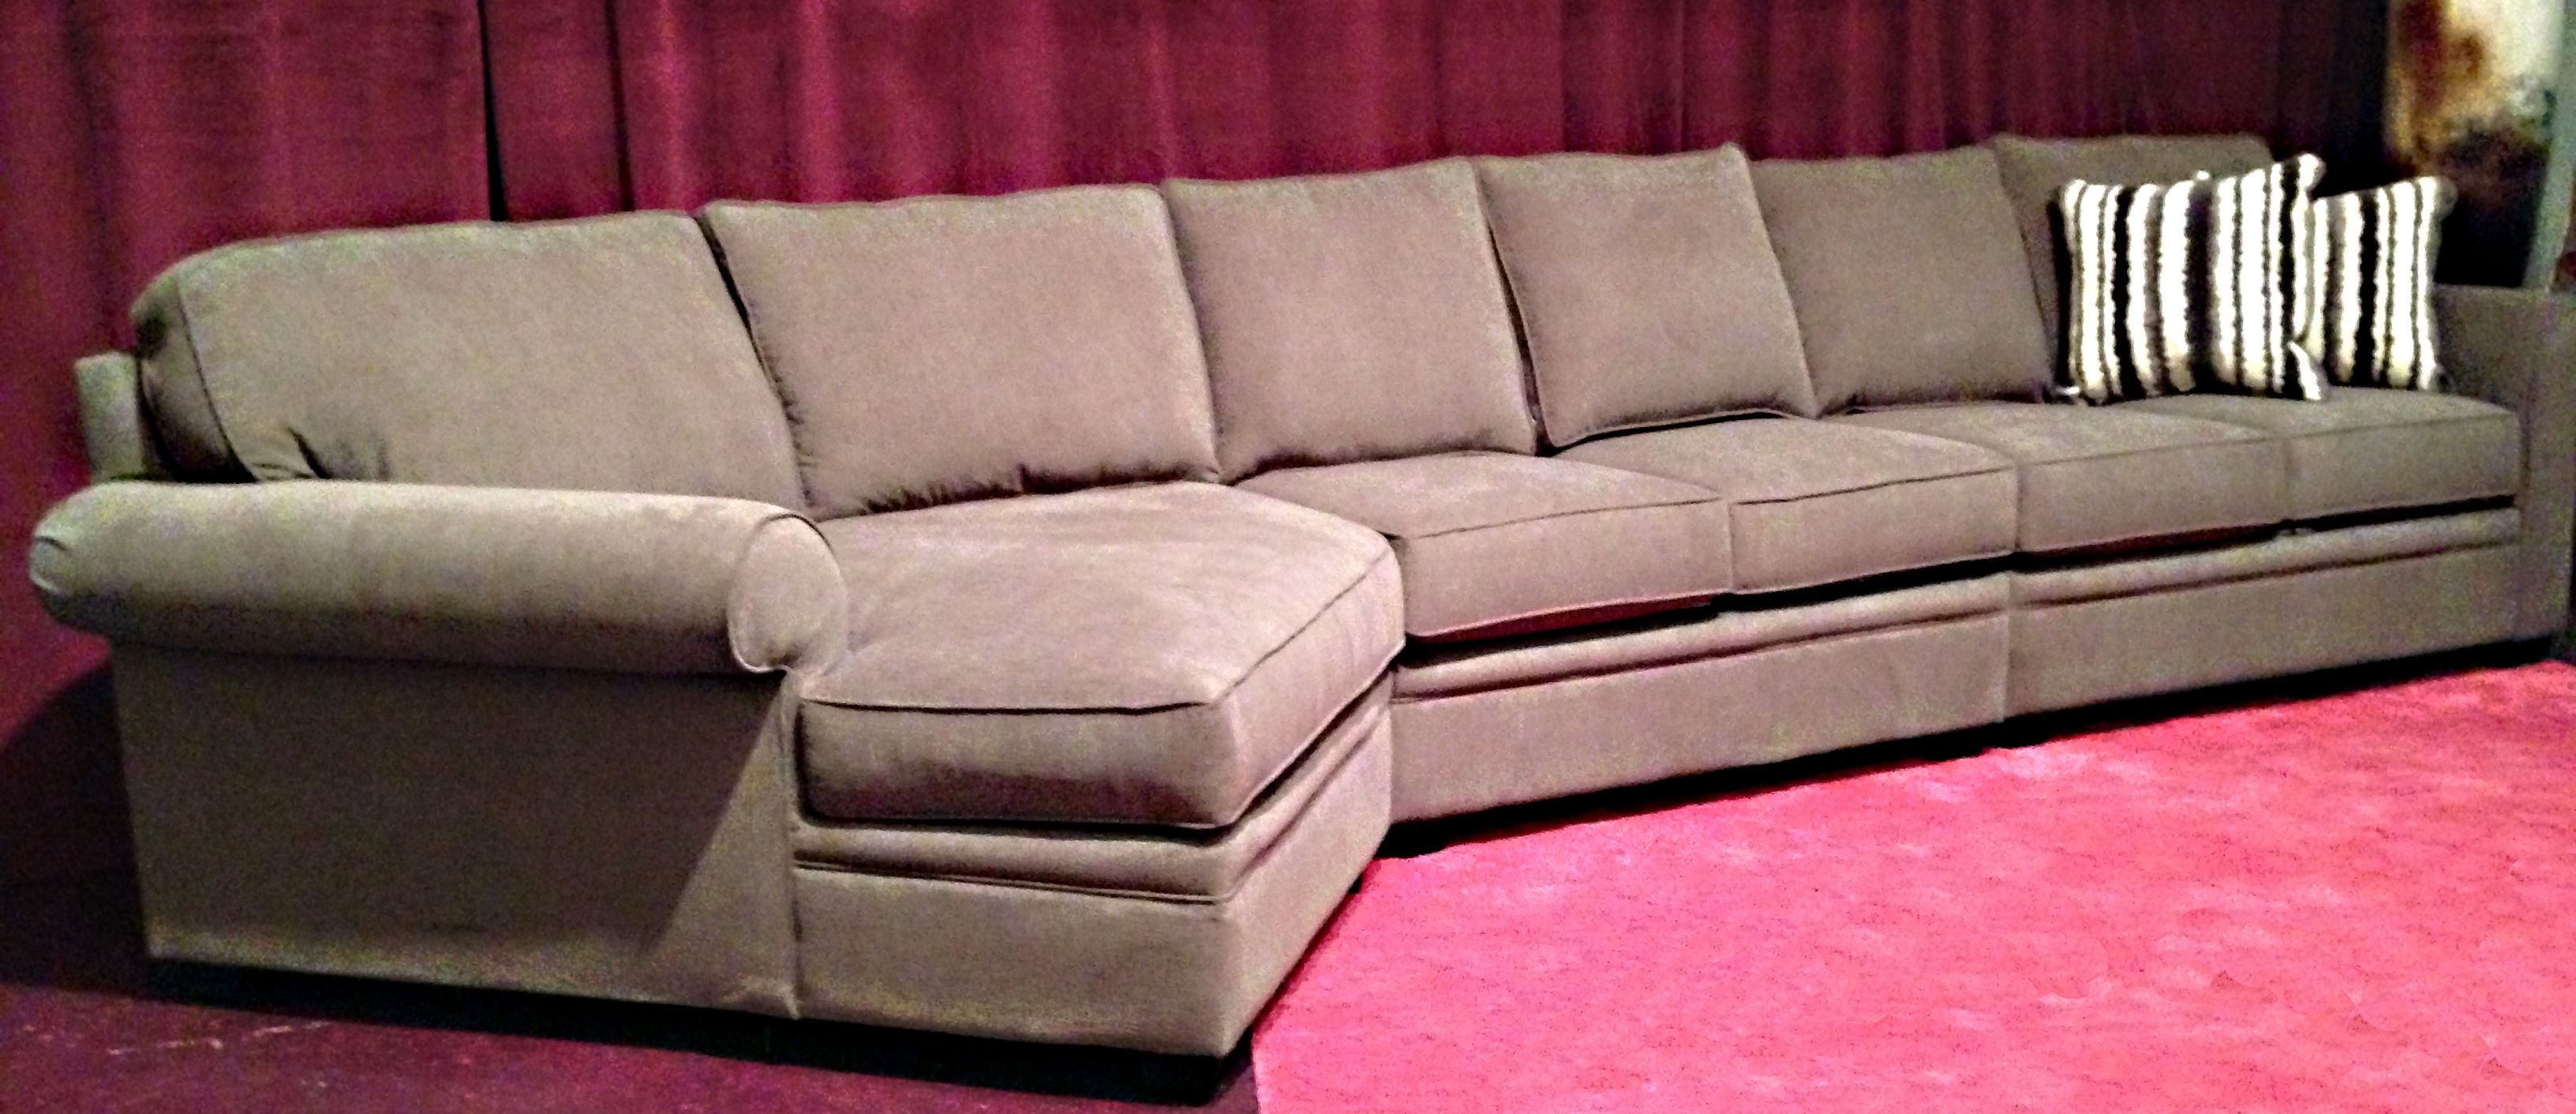 Berkley Sectional Customized Extra Long Sofa Plus Cuddler For Customized Sofas (View 6 of 12)